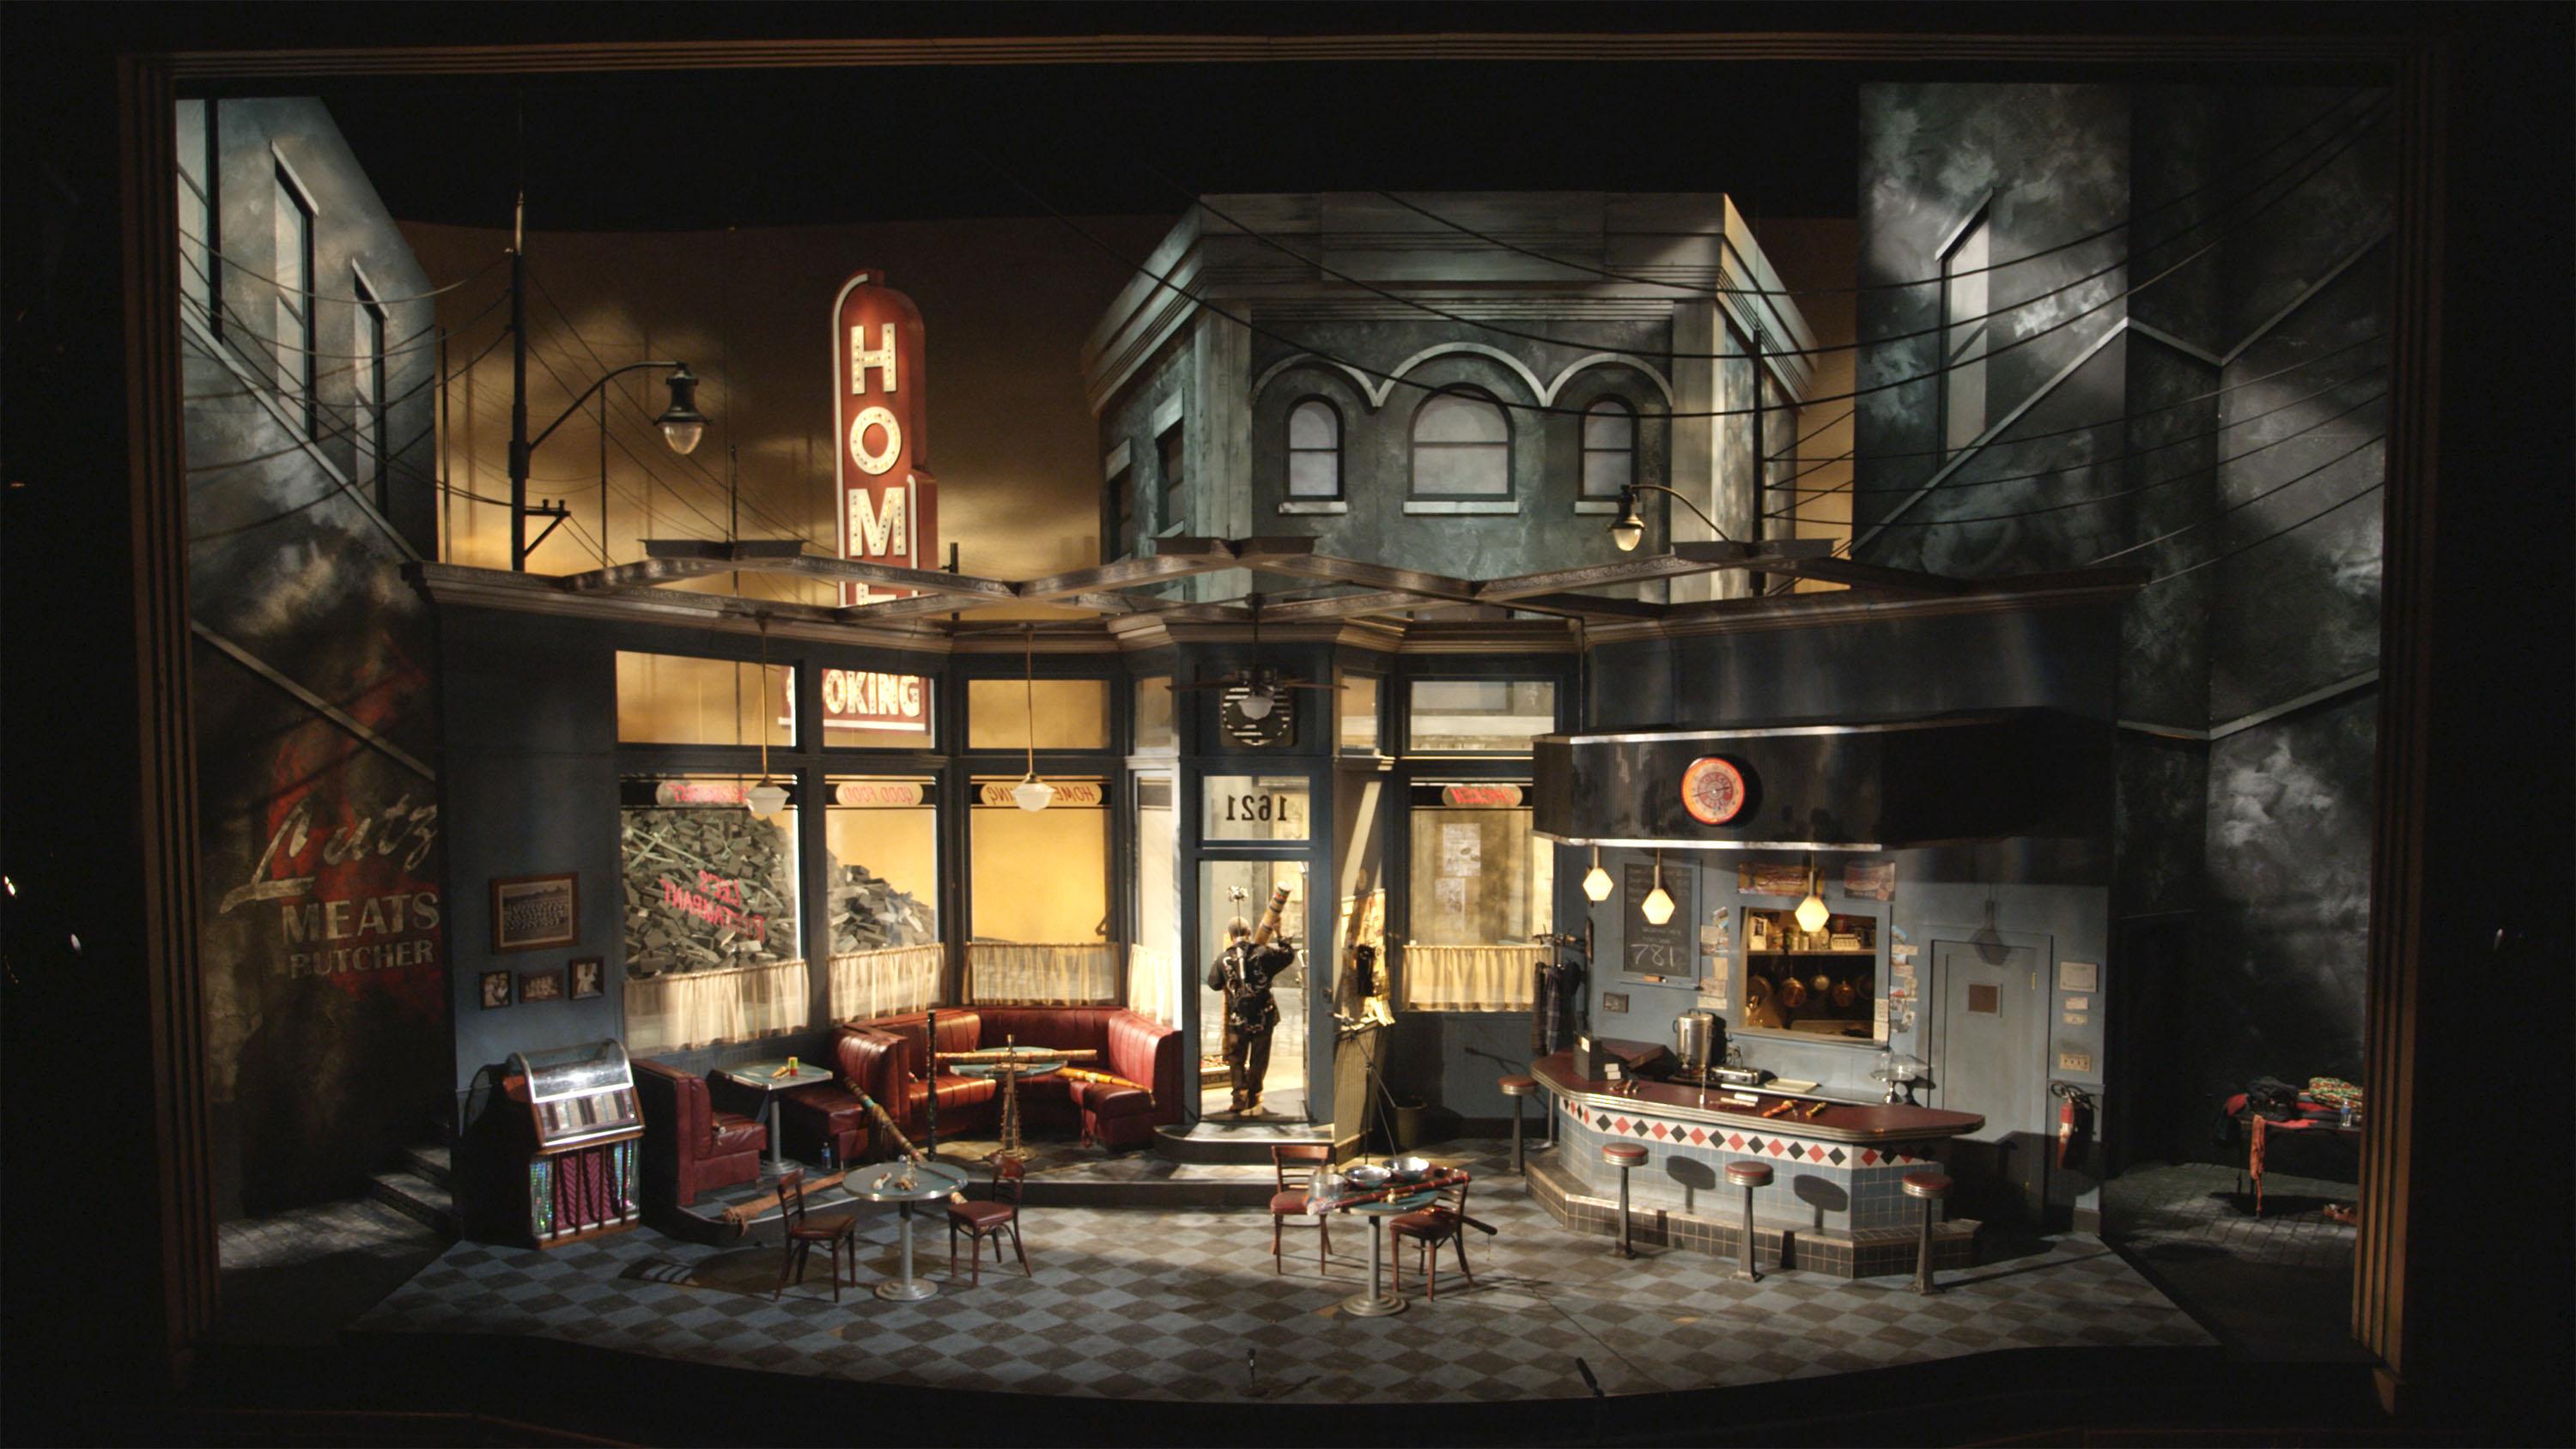 A shadowy stage set featuring a 1950s diner amid row houses, with a single spotlit performer